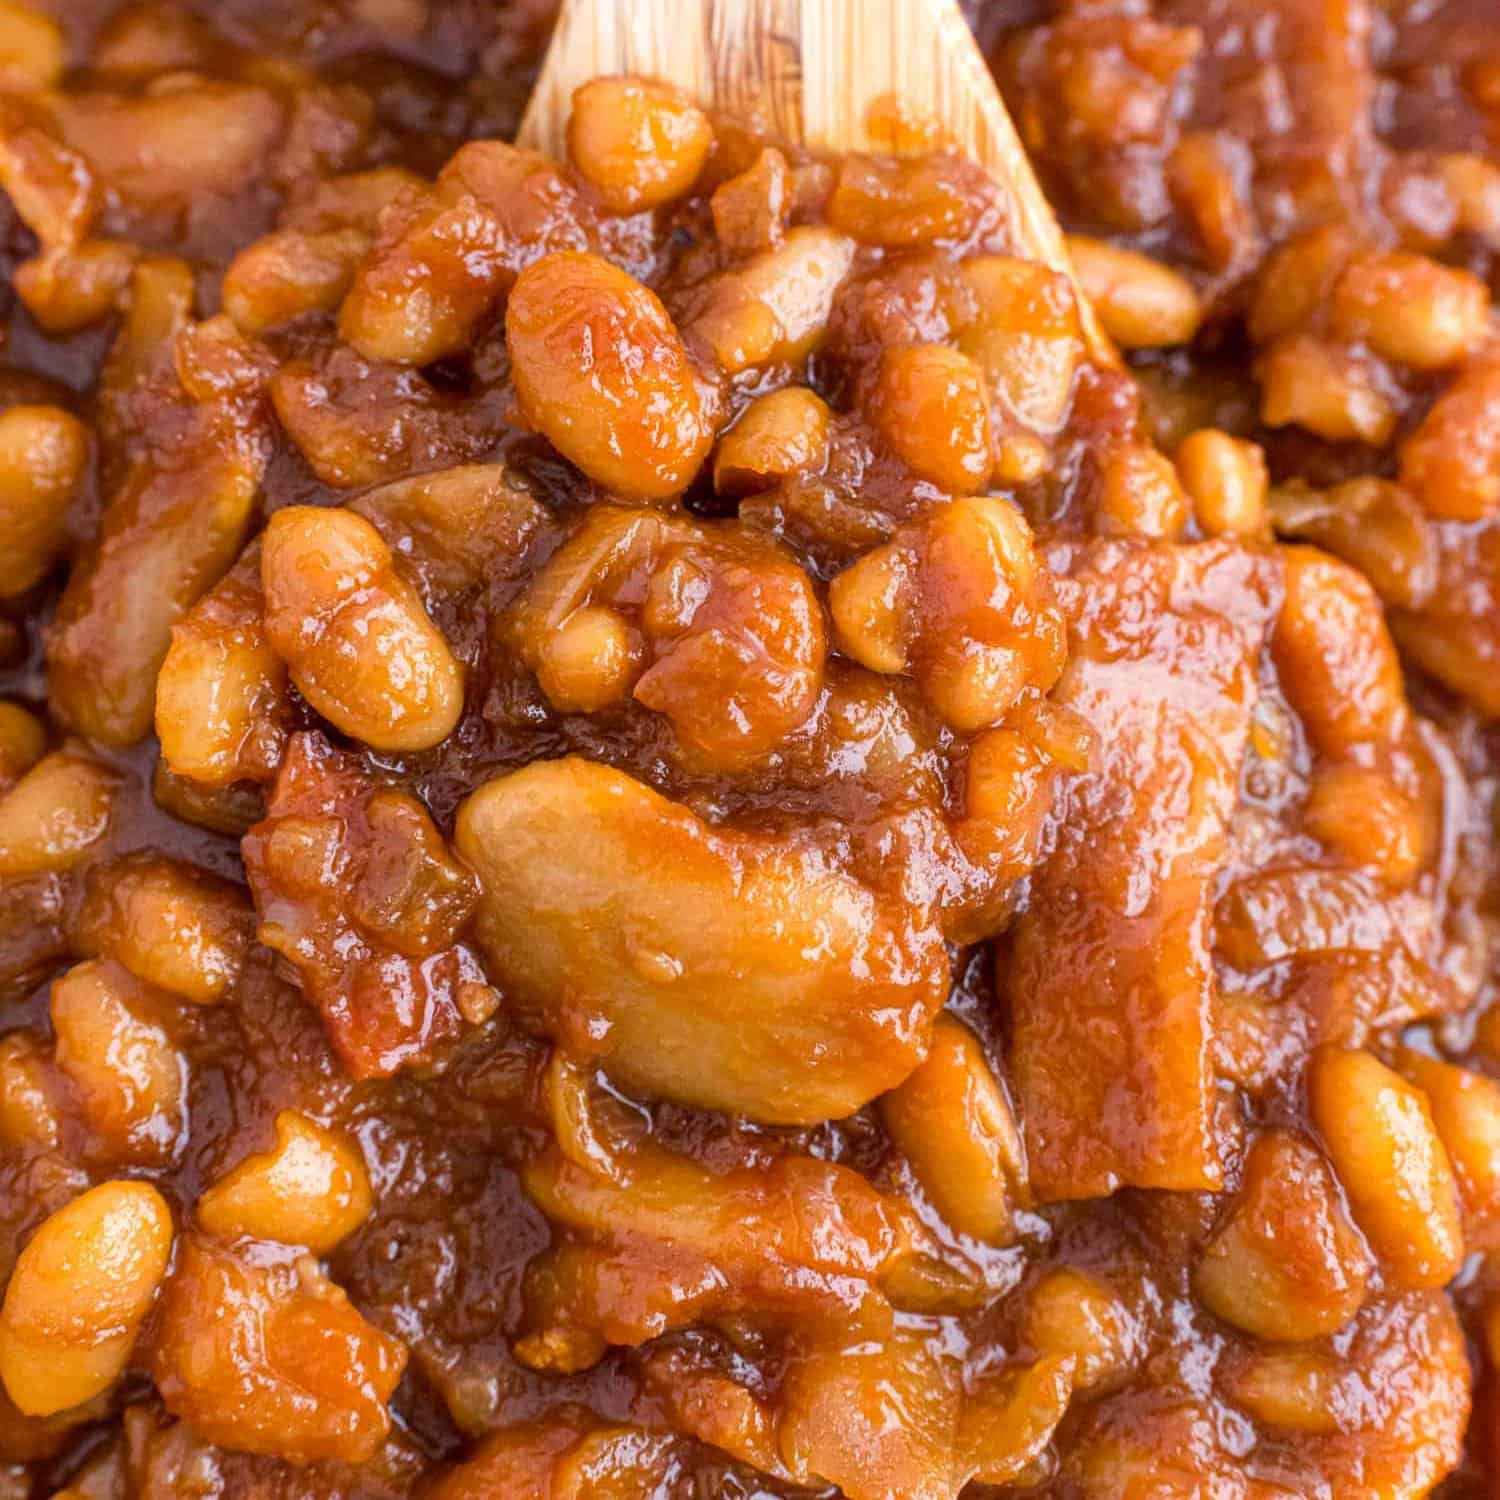 13 Best Tips For Cooking Beans From Scratch